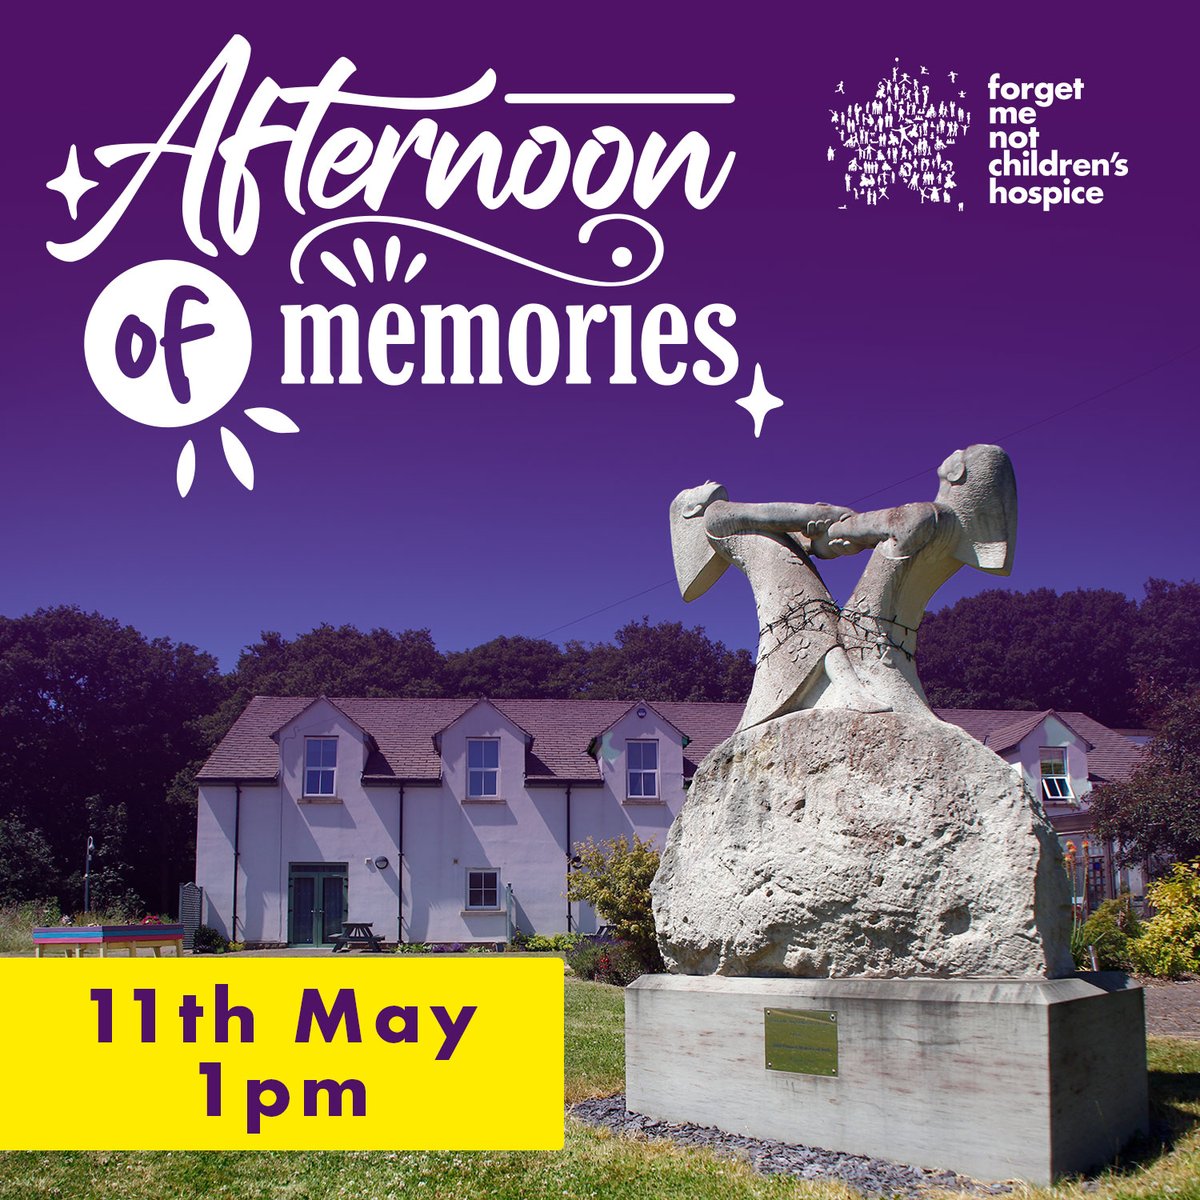 On 11th May from 1pm at Russell House, we will be welcoming bereaved families who are or have been supported by Forget Me Not to our annual Afternoon of Memories. To let us know you’ll be attending, please visit eventbrite.co.uk/e/forget-me-no…